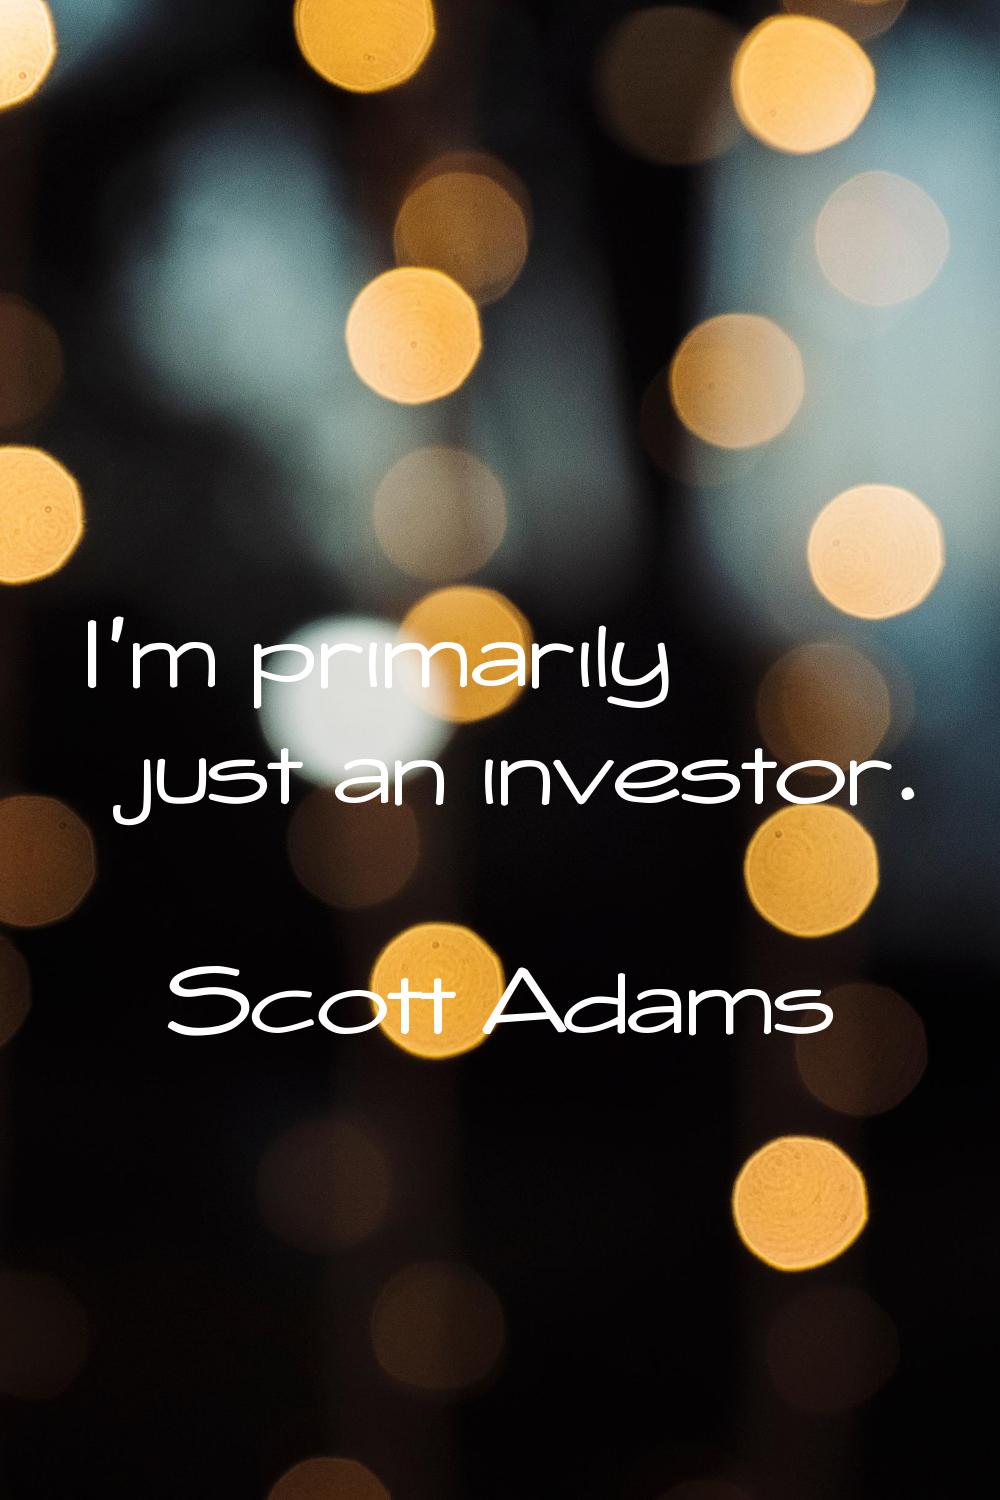 I'm primarily just an investor.